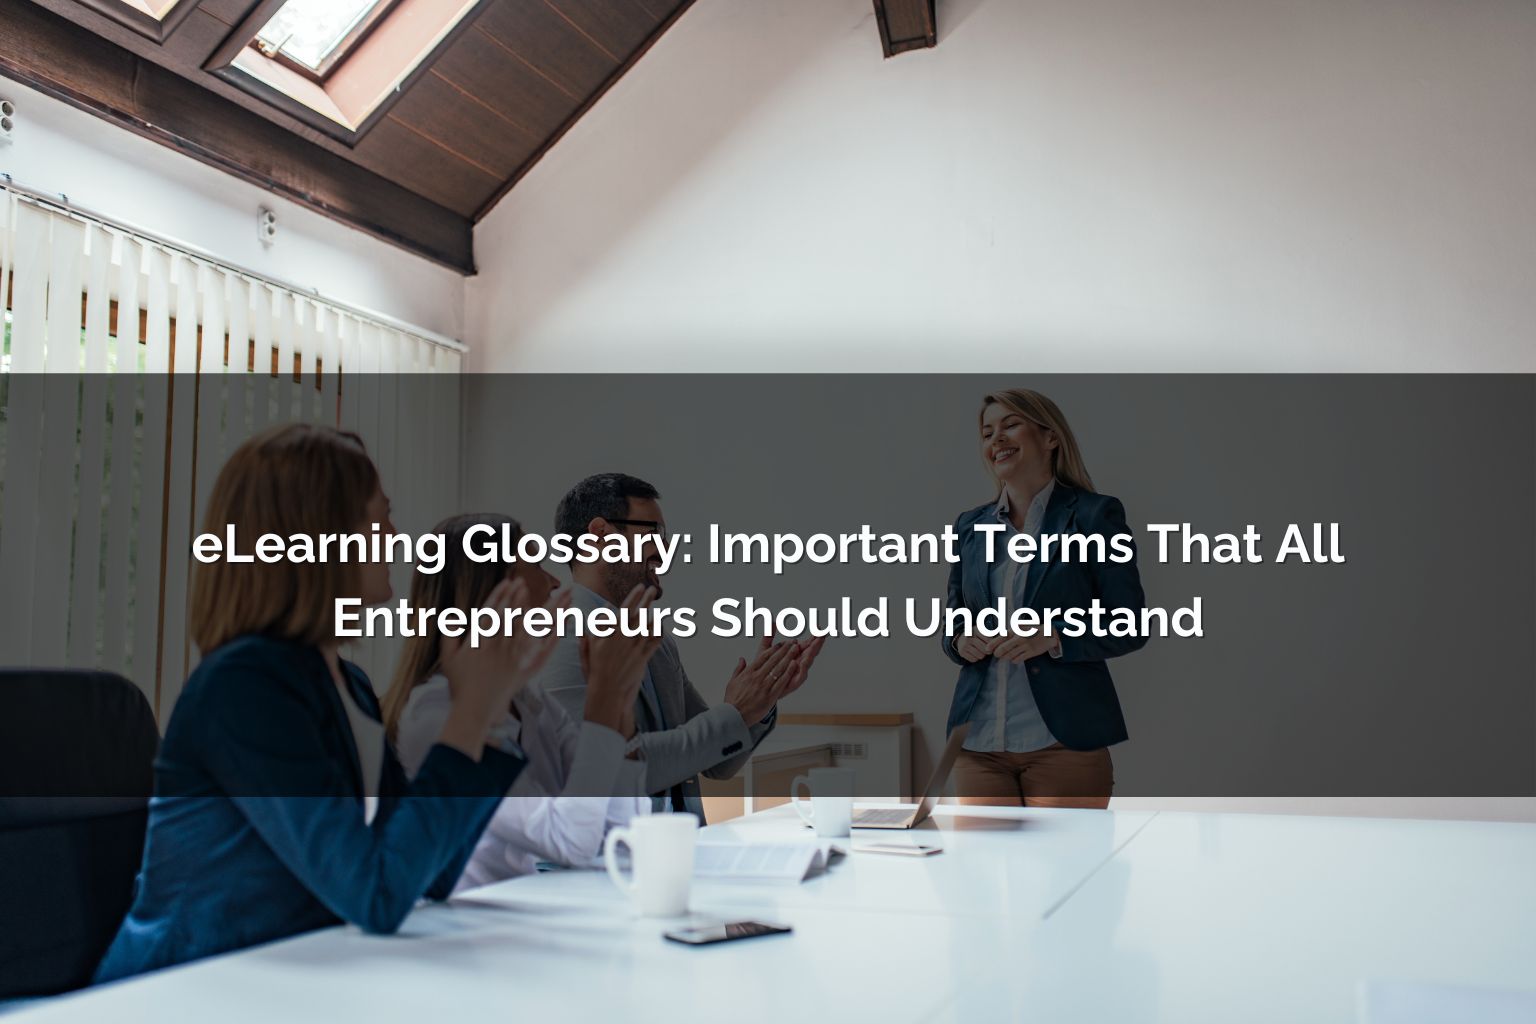 eLearning glossary important terms - Poncho eLearning